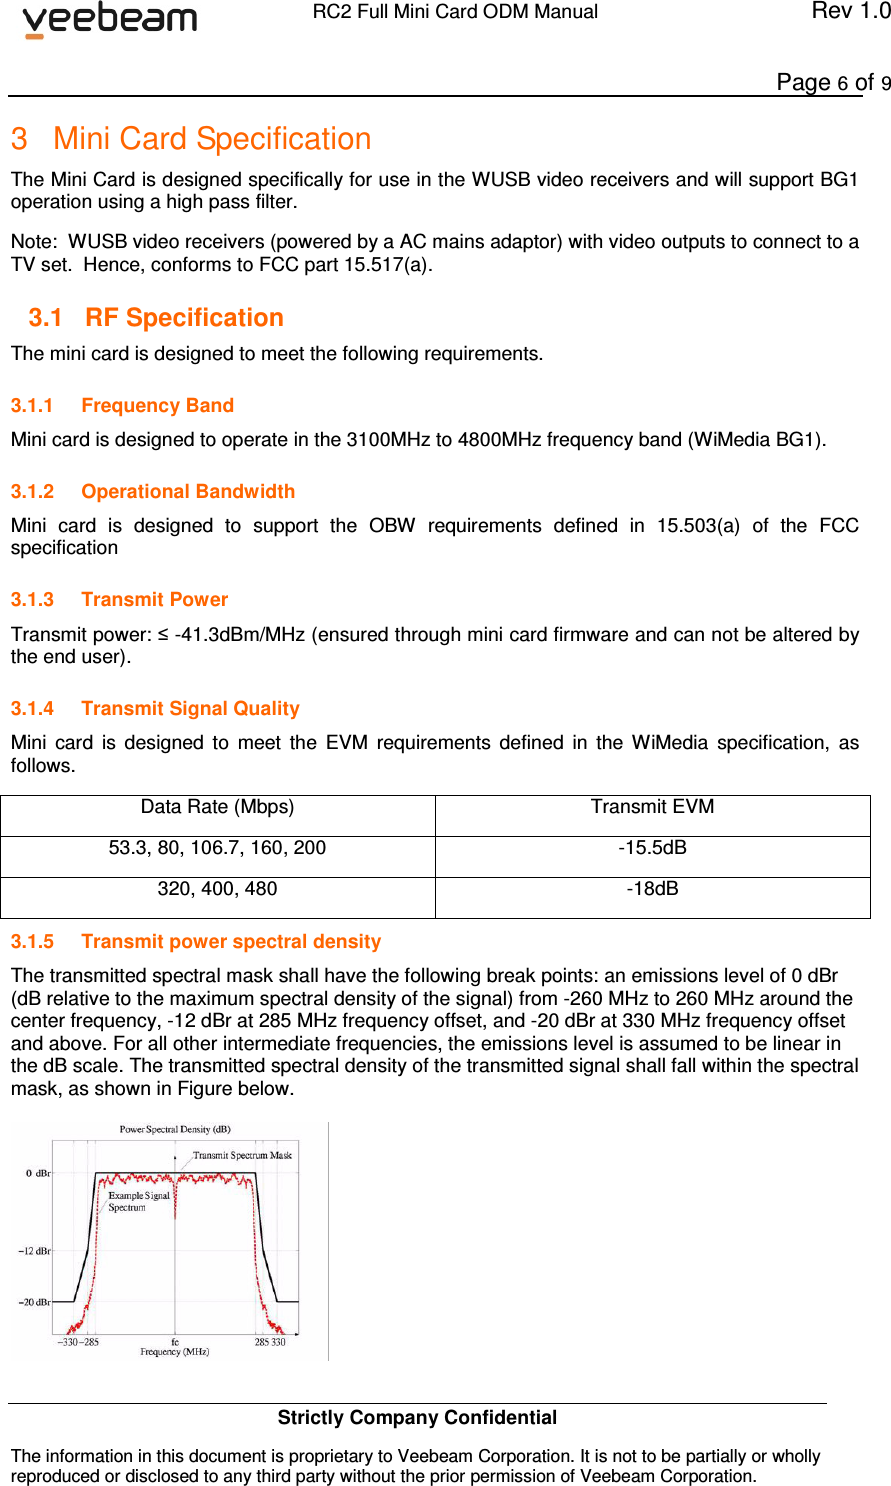             RC2 Full Mini Card ODM Manual  Rev 1.0      Page 6 of 9 Strictly Company Confidential The information in this document is proprietary to Veebeam Corporation. It is not to be partially or wholly reproduced or disclosed to any third party without the prior permission of Veebeam Corporation.   3  Mini Card Specification The Mini Card is designed specifically for use in the WUSB video receivers and will support BG1 operation using a high pass filter.  Note:  WUSB video receivers (powered by a AC mains adaptor) with video outputs to connect to a TV set.  Hence, conforms to FCC part 15.517(a). 3.1  RF Specification The mini card is designed to meet the following requirements. 3.1.1  Frequency Band Mini card is designed to operate in the 3100MHz to 4800MHz frequency band (WiMedia BG1). 3.1.2  Operational Bandwidth Mini  card  is  designed  to  support  the  OBW  requirements  defined  in  15.503(a)  of  the  FCC specification 3.1.3  Transmit Power Transmit power: ≤ -41.3dBm/MHz (ensured through mini card firmware and can not be altered by the end user). 3.1.4  Transmit Signal Quality Mini  card  is  designed  to  meet  the  EVM  requirements  defined  in  the  WiMedia  specification,  as follows. Data Rate (Mbps)  Transmit EVM 53.3, 80, 106.7, 160, 200  -15.5dB 320, 400, 480  -18dB 3.1.5  Transmit power spectral density The transmitted spectral mask shall have the following break points: an emissions level of 0 dBr (dB relative to the maximum spectral density of the signal) from -260 MHz to 260 MHz around the center frequency, -12 dBr at 285 MHz frequency offset, and -20 dBr at 330 MHz frequency offset and above. For all other intermediate frequencies, the emissions level is assumed to be linear in the dB scale. The transmitted spectral density of the transmitted signal shall fall within the spectral mask, as shown in Figure below.   